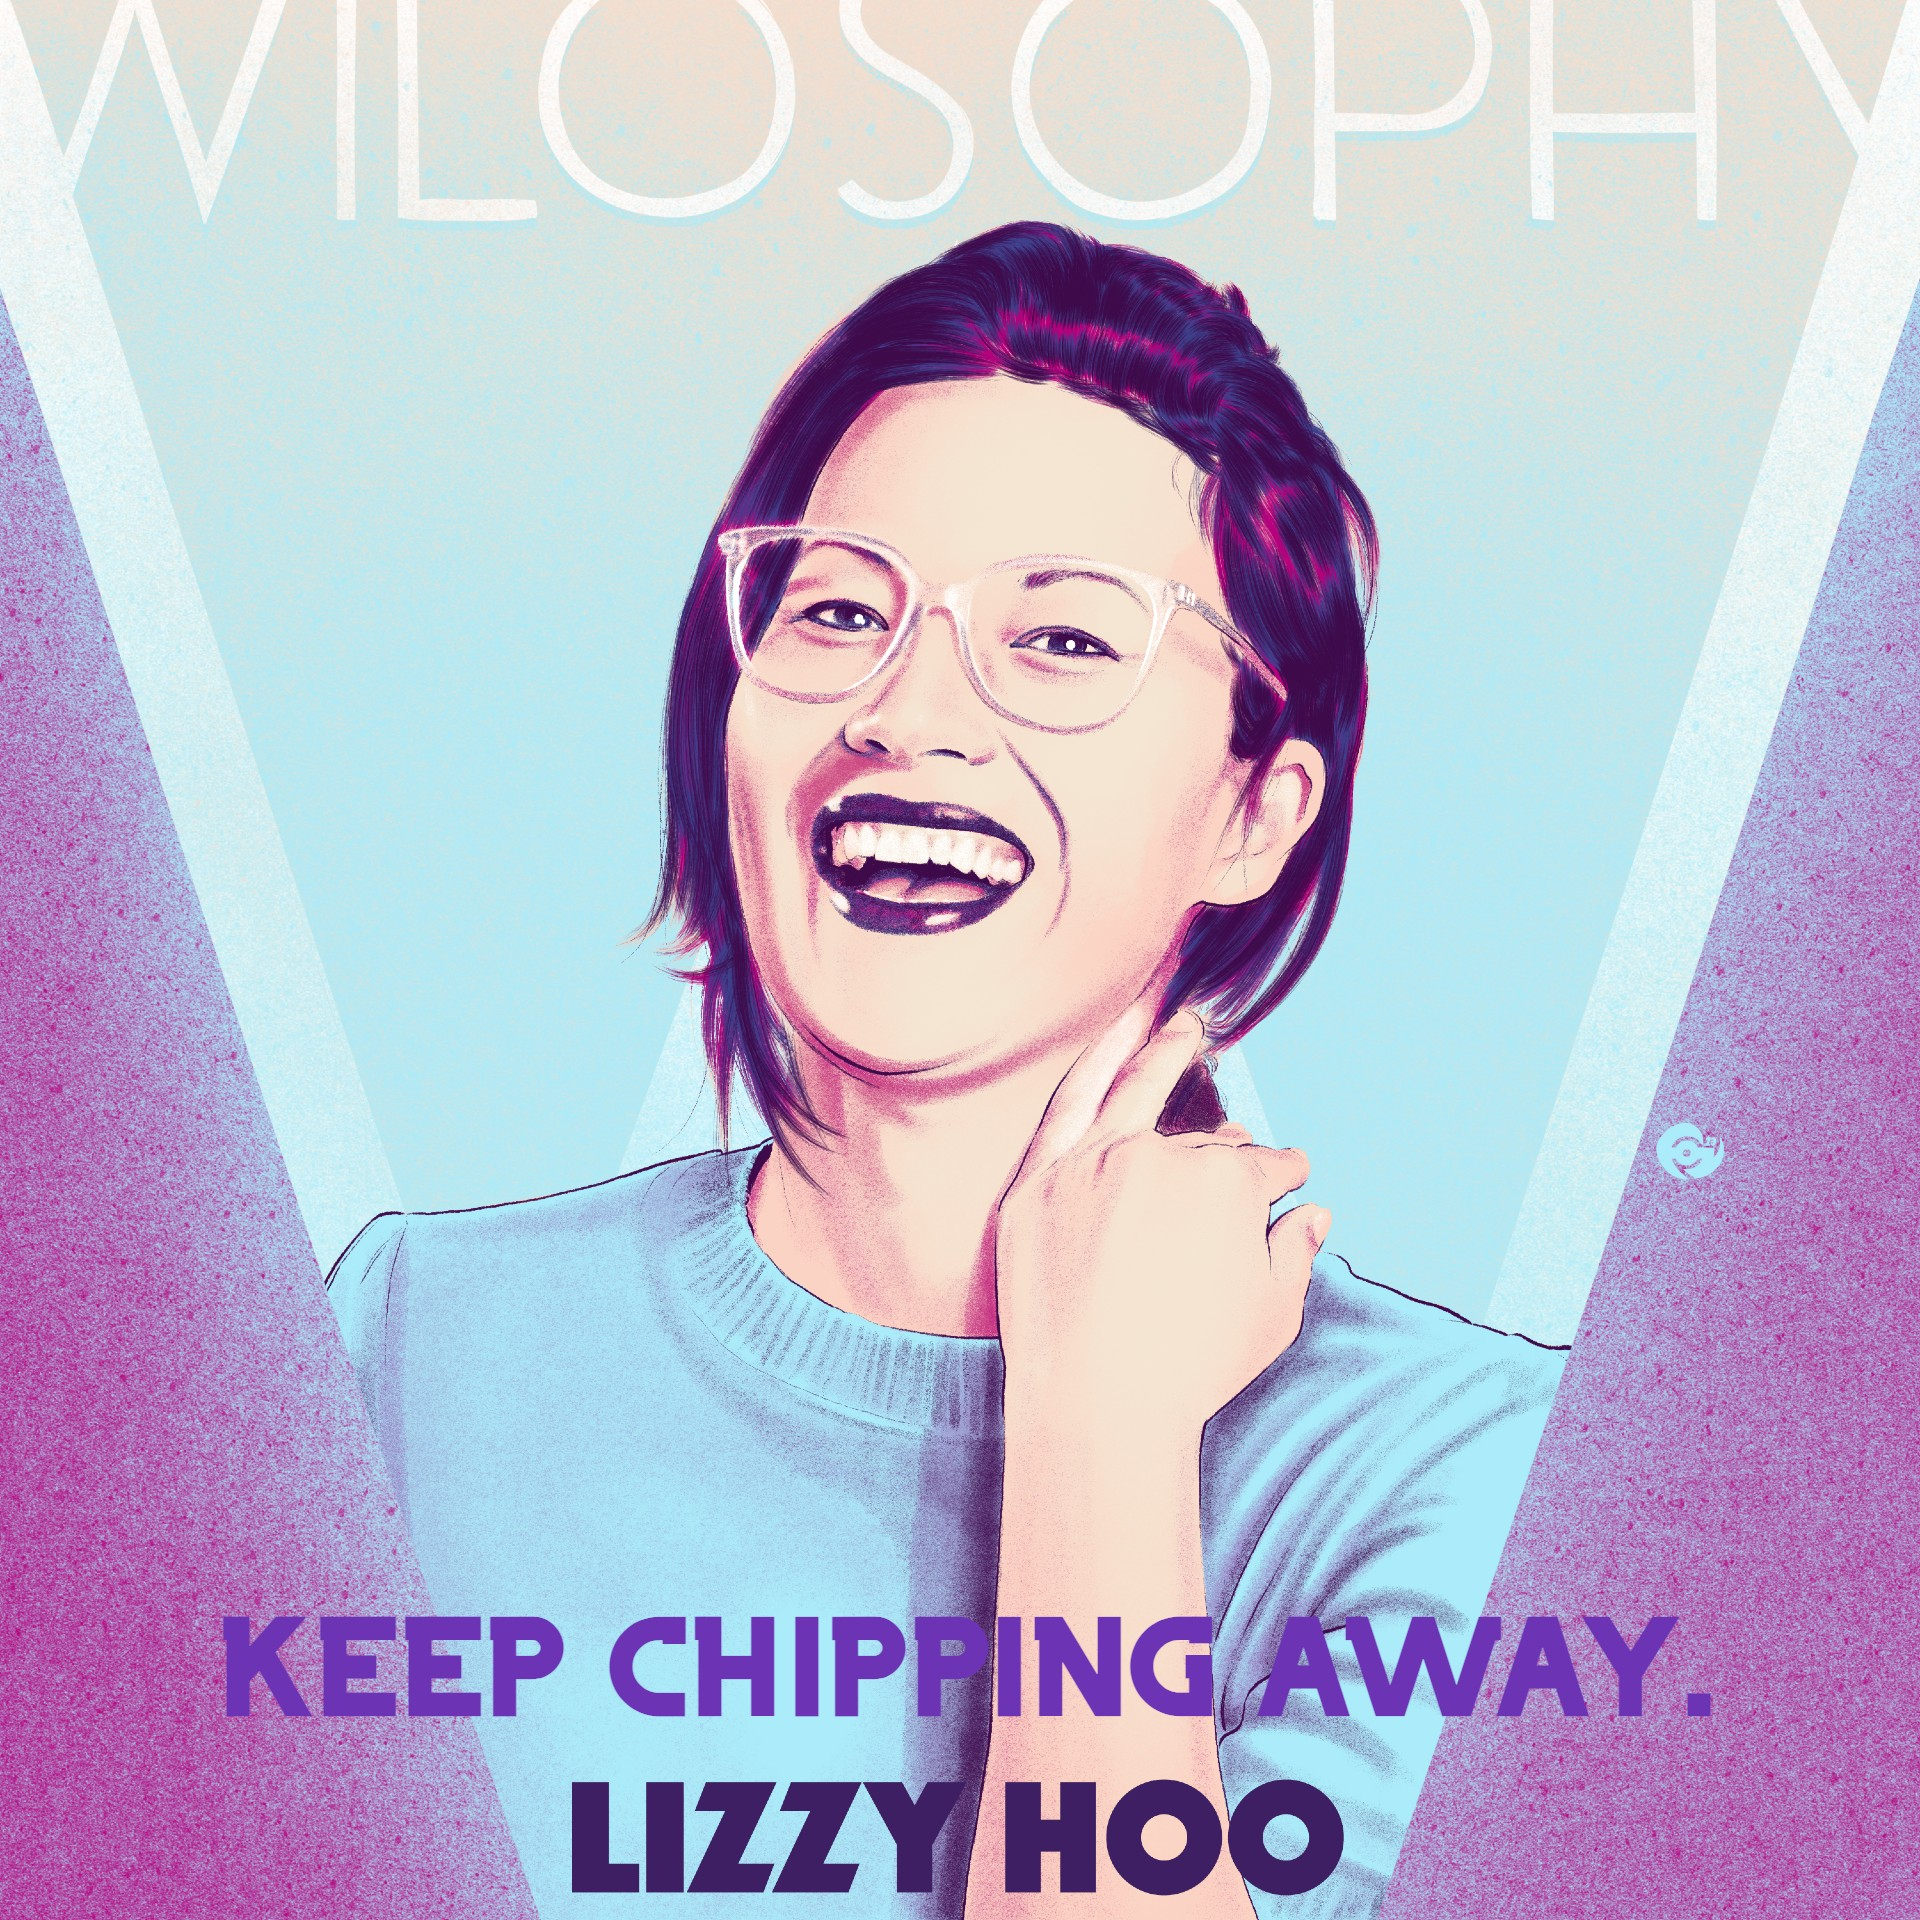 WILOSOPHY with Lizzy Hoo